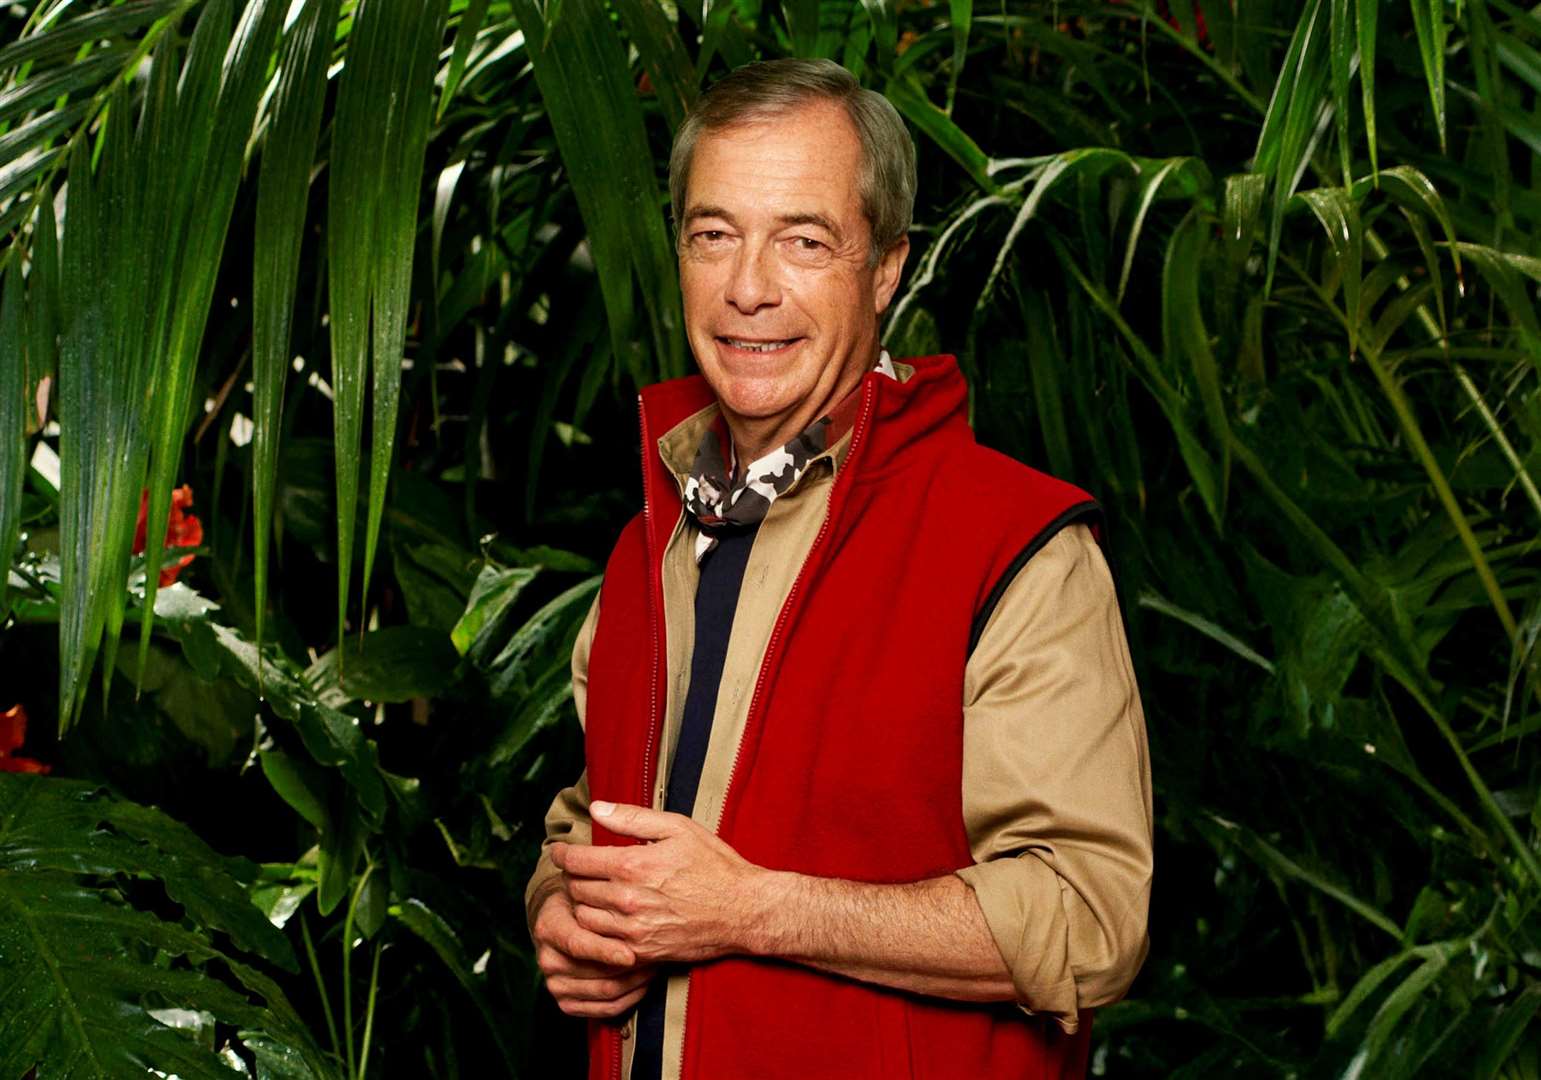 Nigel Farage is rarely out of the spotlight and appeared on I’m A Celebrity… Get Me Out Of Here! last year. Picture: ITV